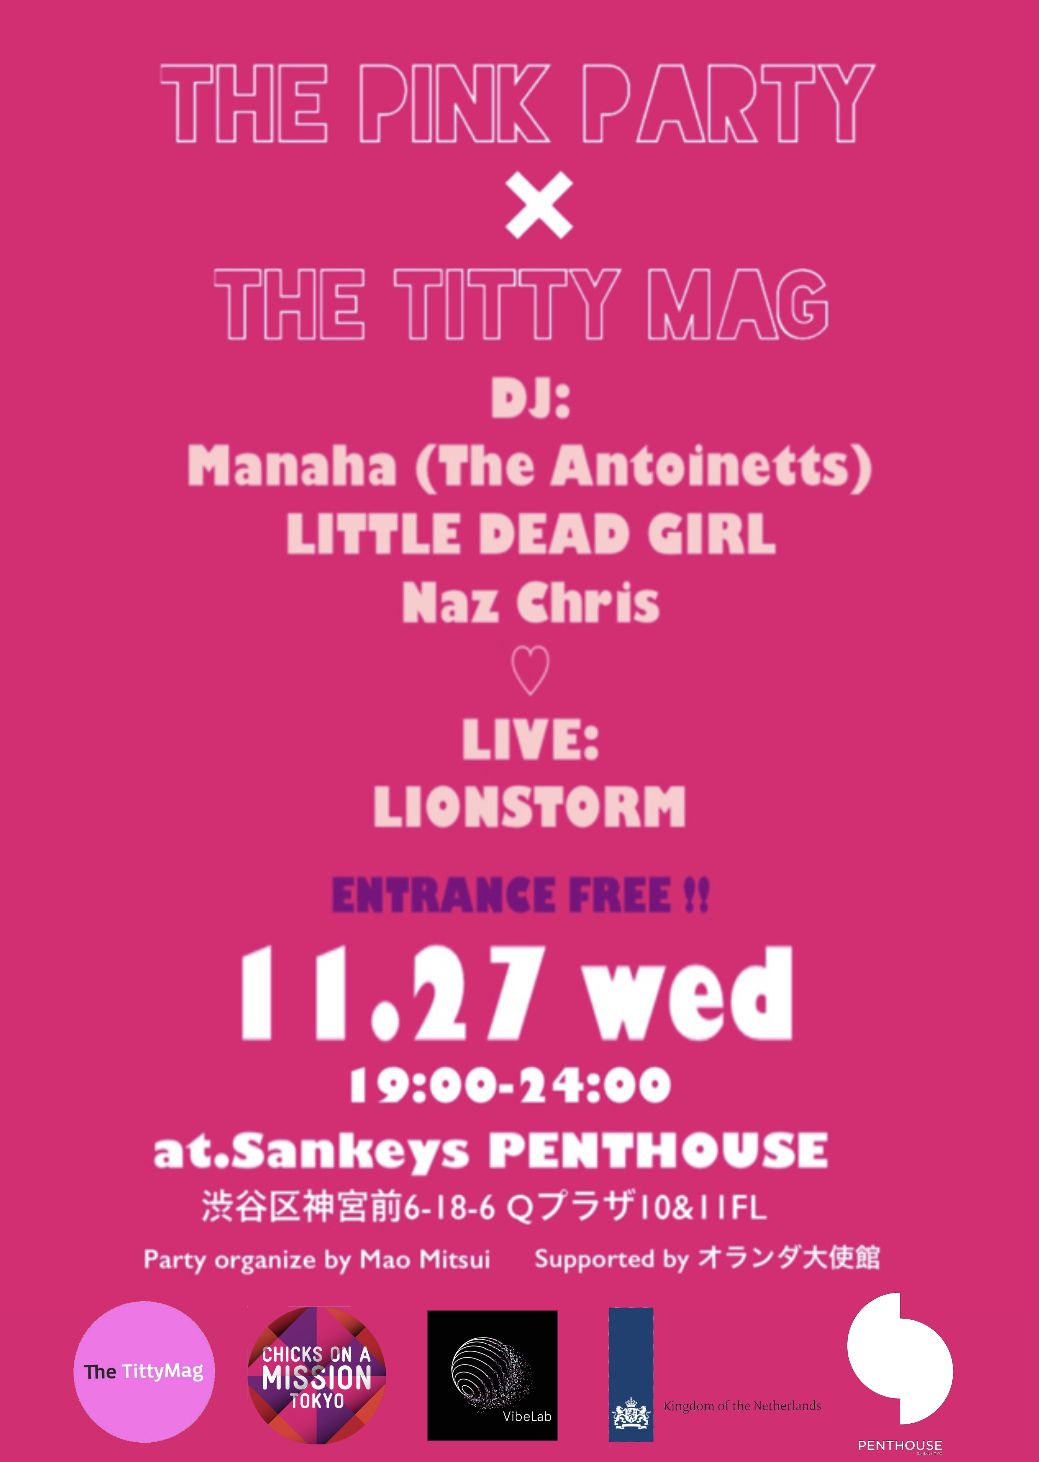 THE PINK PARTY X THE TITTY MAG